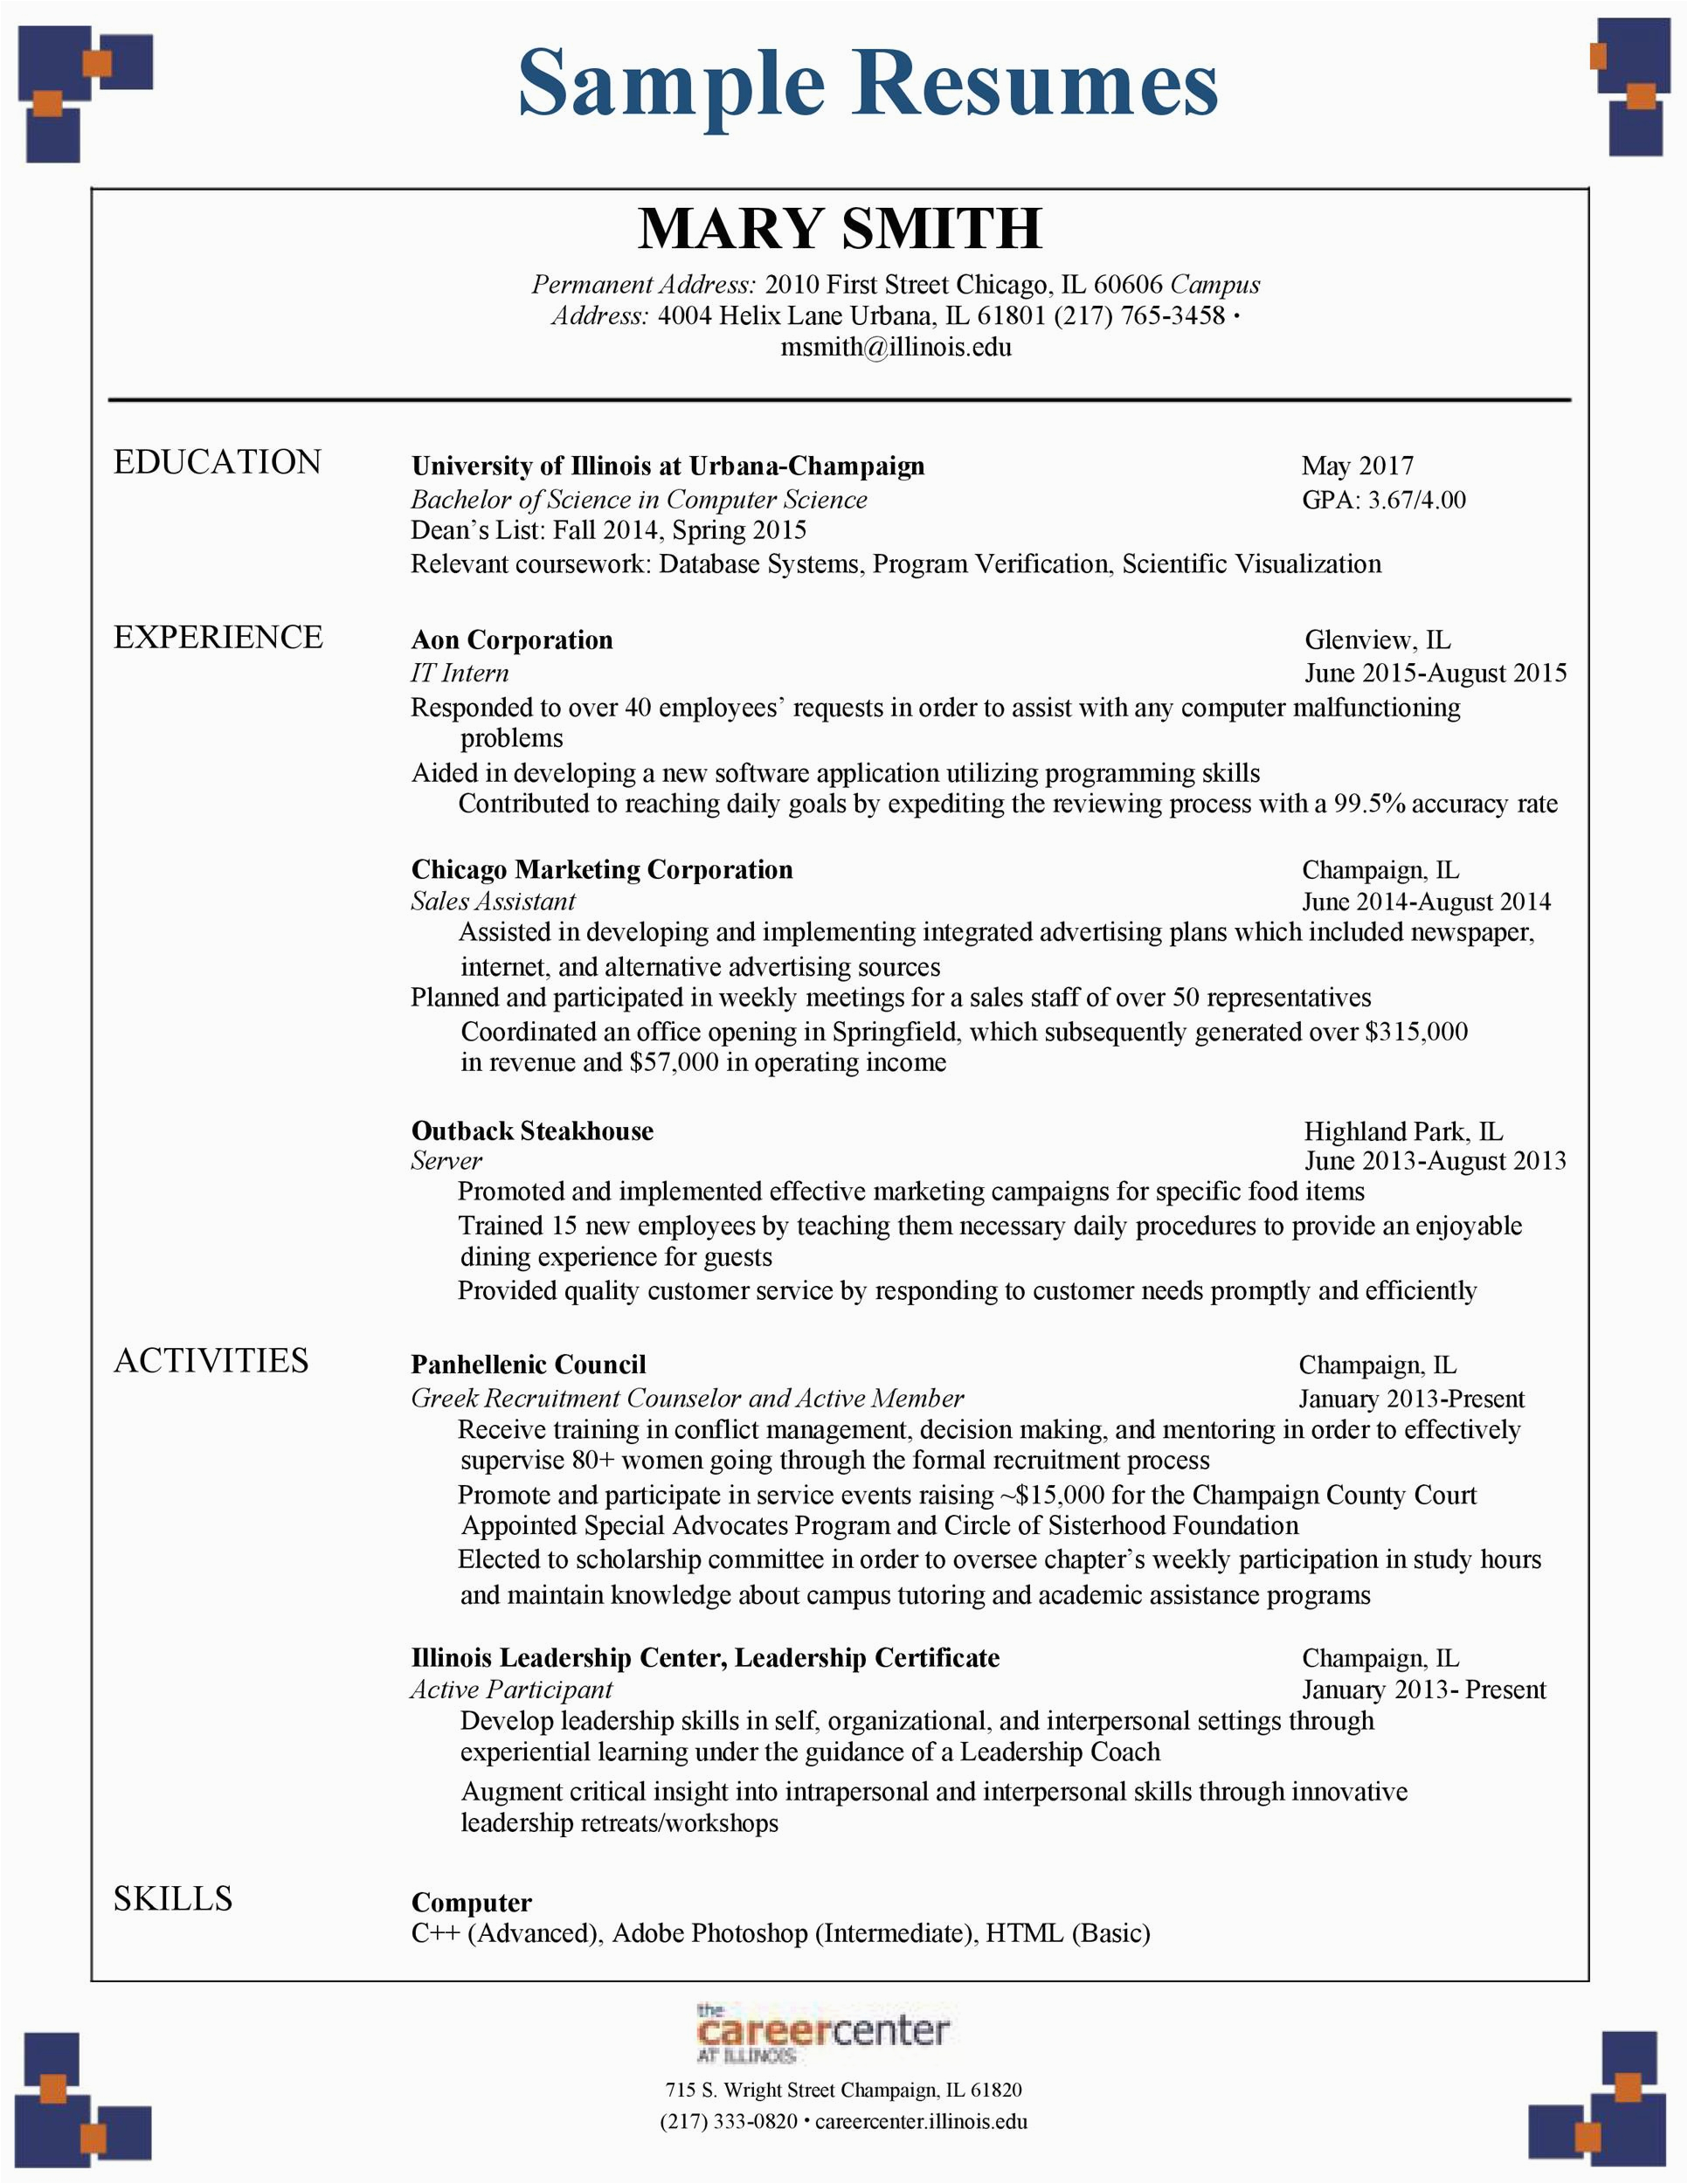 Sample Academic Resume for College Application College Application Resume Template Resume Templates for College